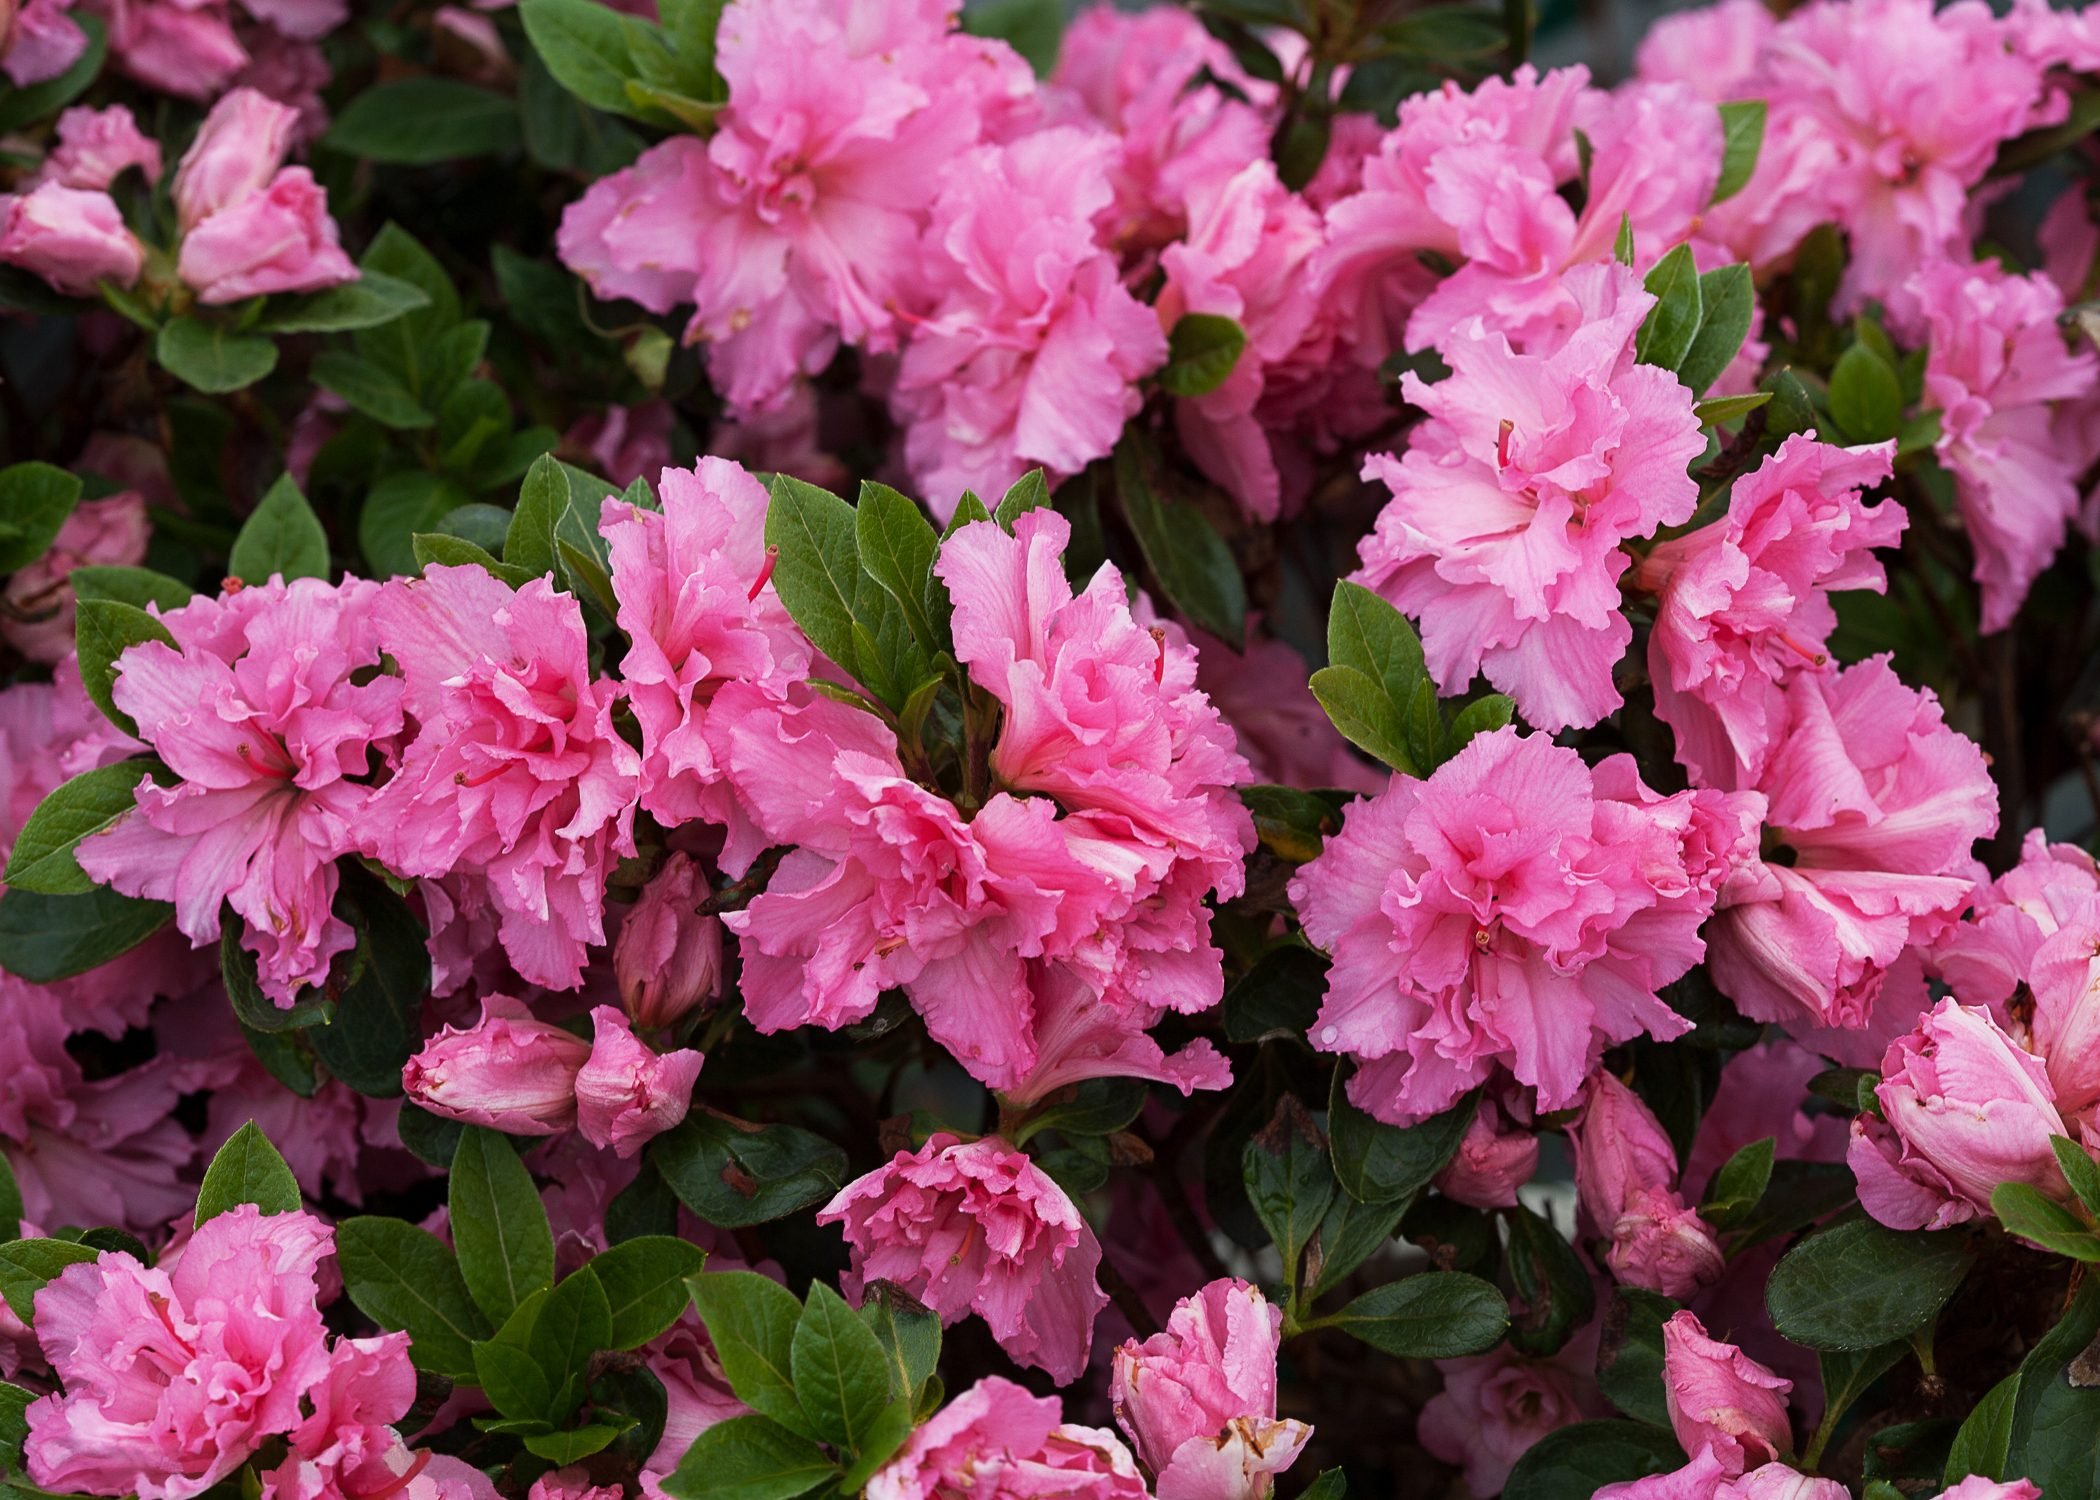 Rhododendron vs Azalea: How to Tell the Difference